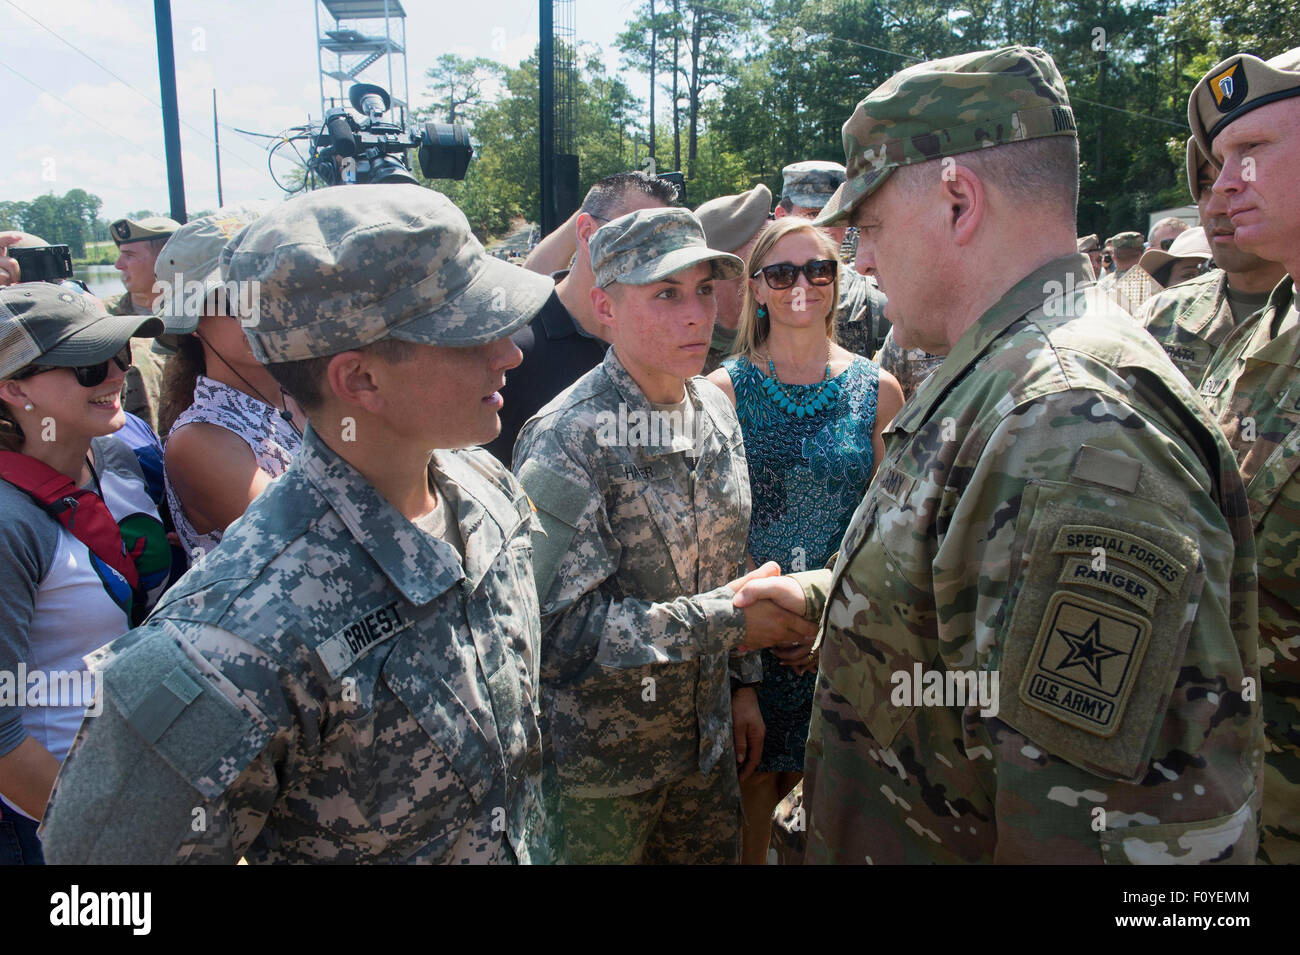 U.S. Army Captain Kristen Griest, left, and fellow soldier 1st Lt. Shaye Haver, center, are congratulated by Army Chief of Staff Gen. Mark A. Milley after they become the first women to graduate from Army Ranger school August 21, 2015 at Fort Benning, Georgia. Stock Photo